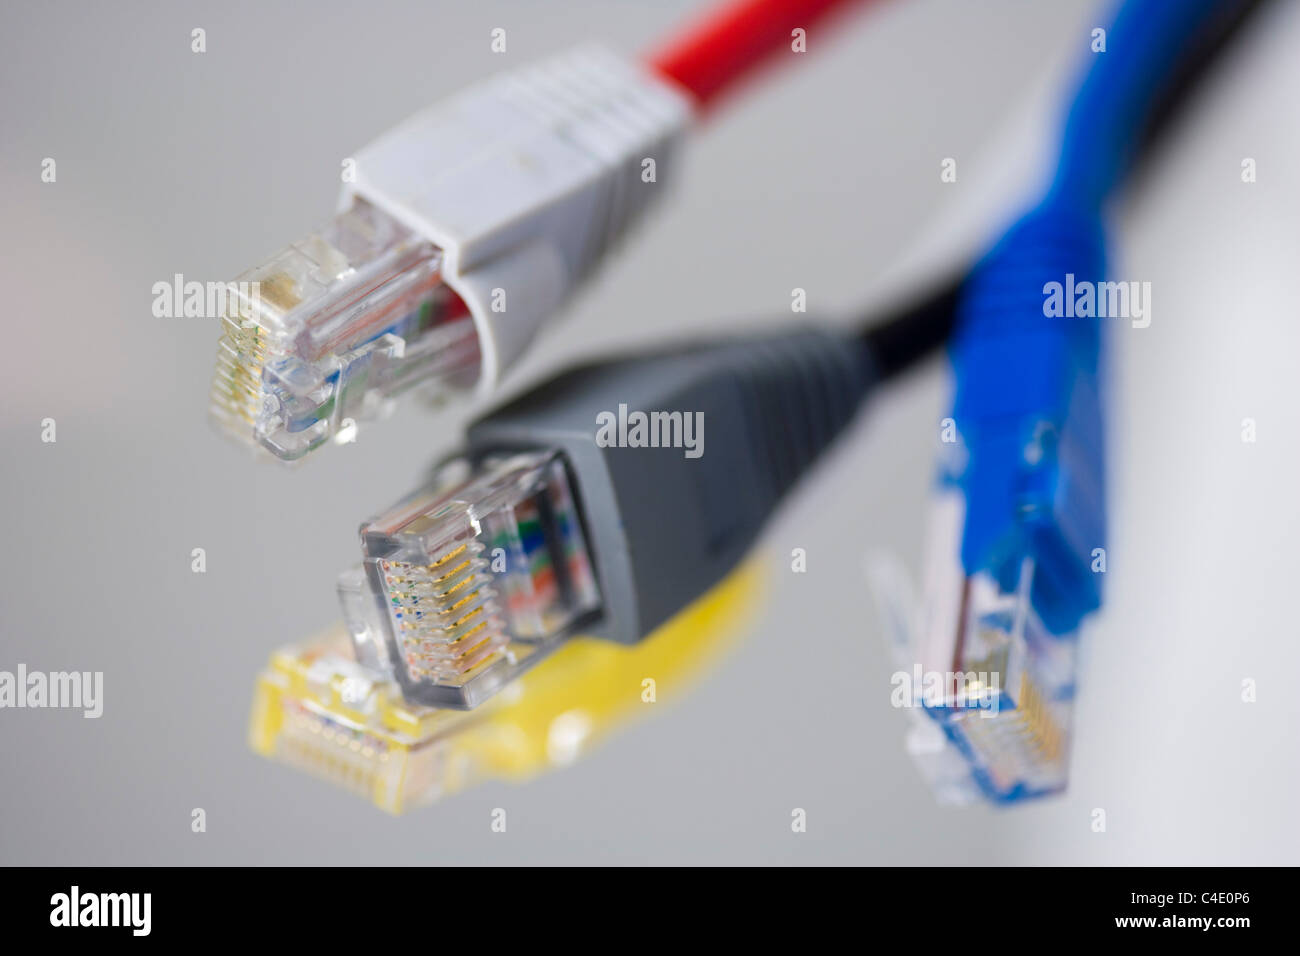 Four RJ-45 Ethernet connectors on white background Stock Photo